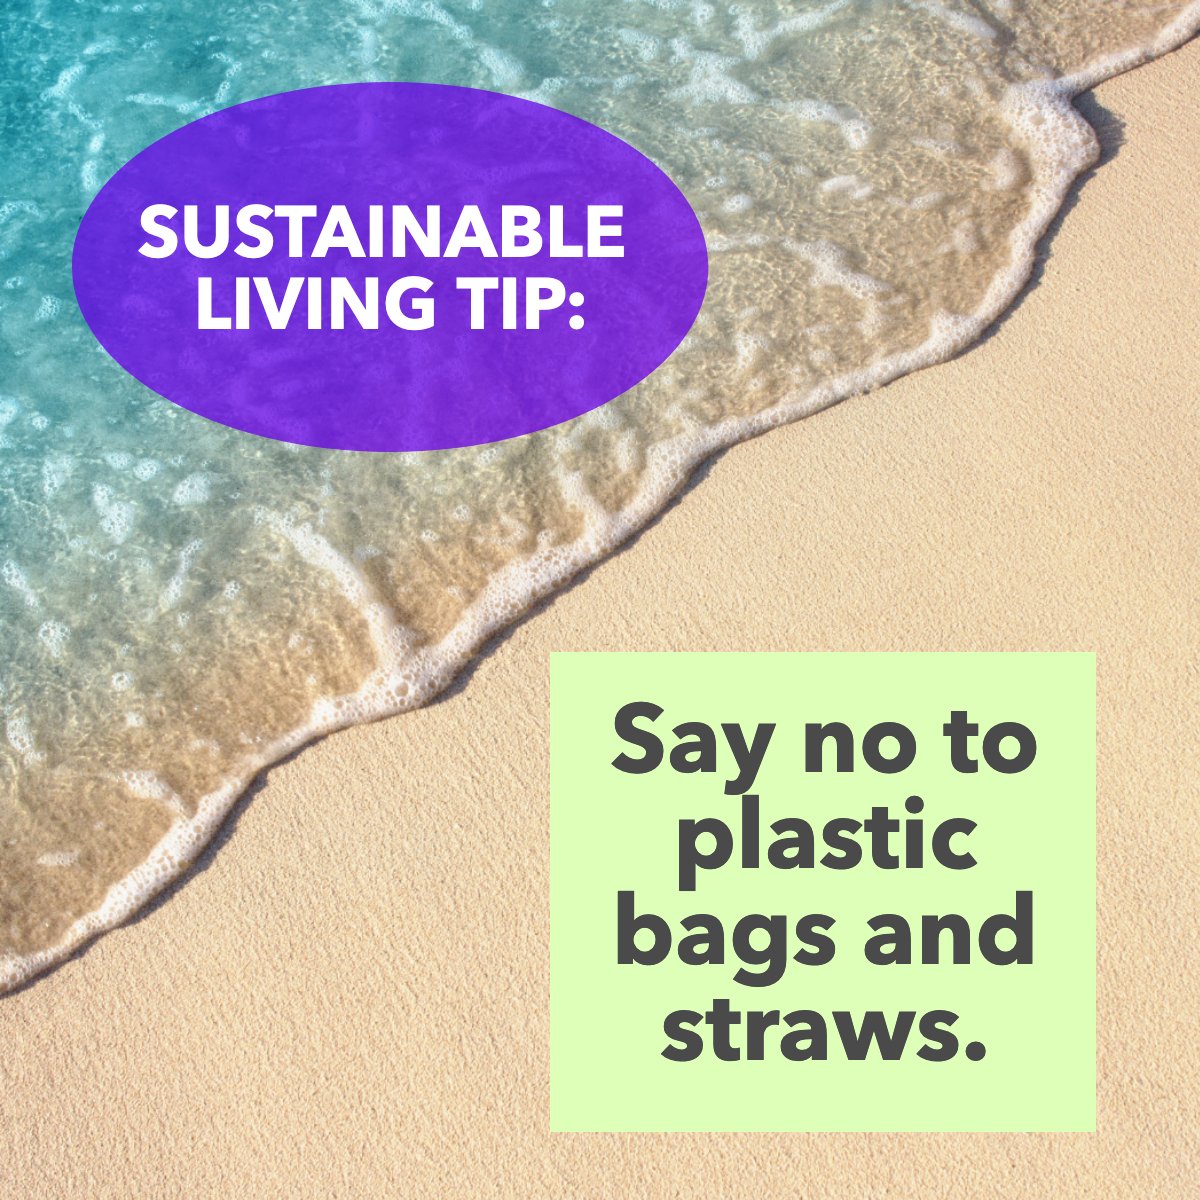 'Never doubt that a small group of thoughtful, committed citizens can change the world; indeed it’s the only thing that ever has.'
– Margaret Mead

#sustainablelifestyle    #sustainable    #sustainablity    #noplastic    #savethebeaches 
#realtor #realtorlife